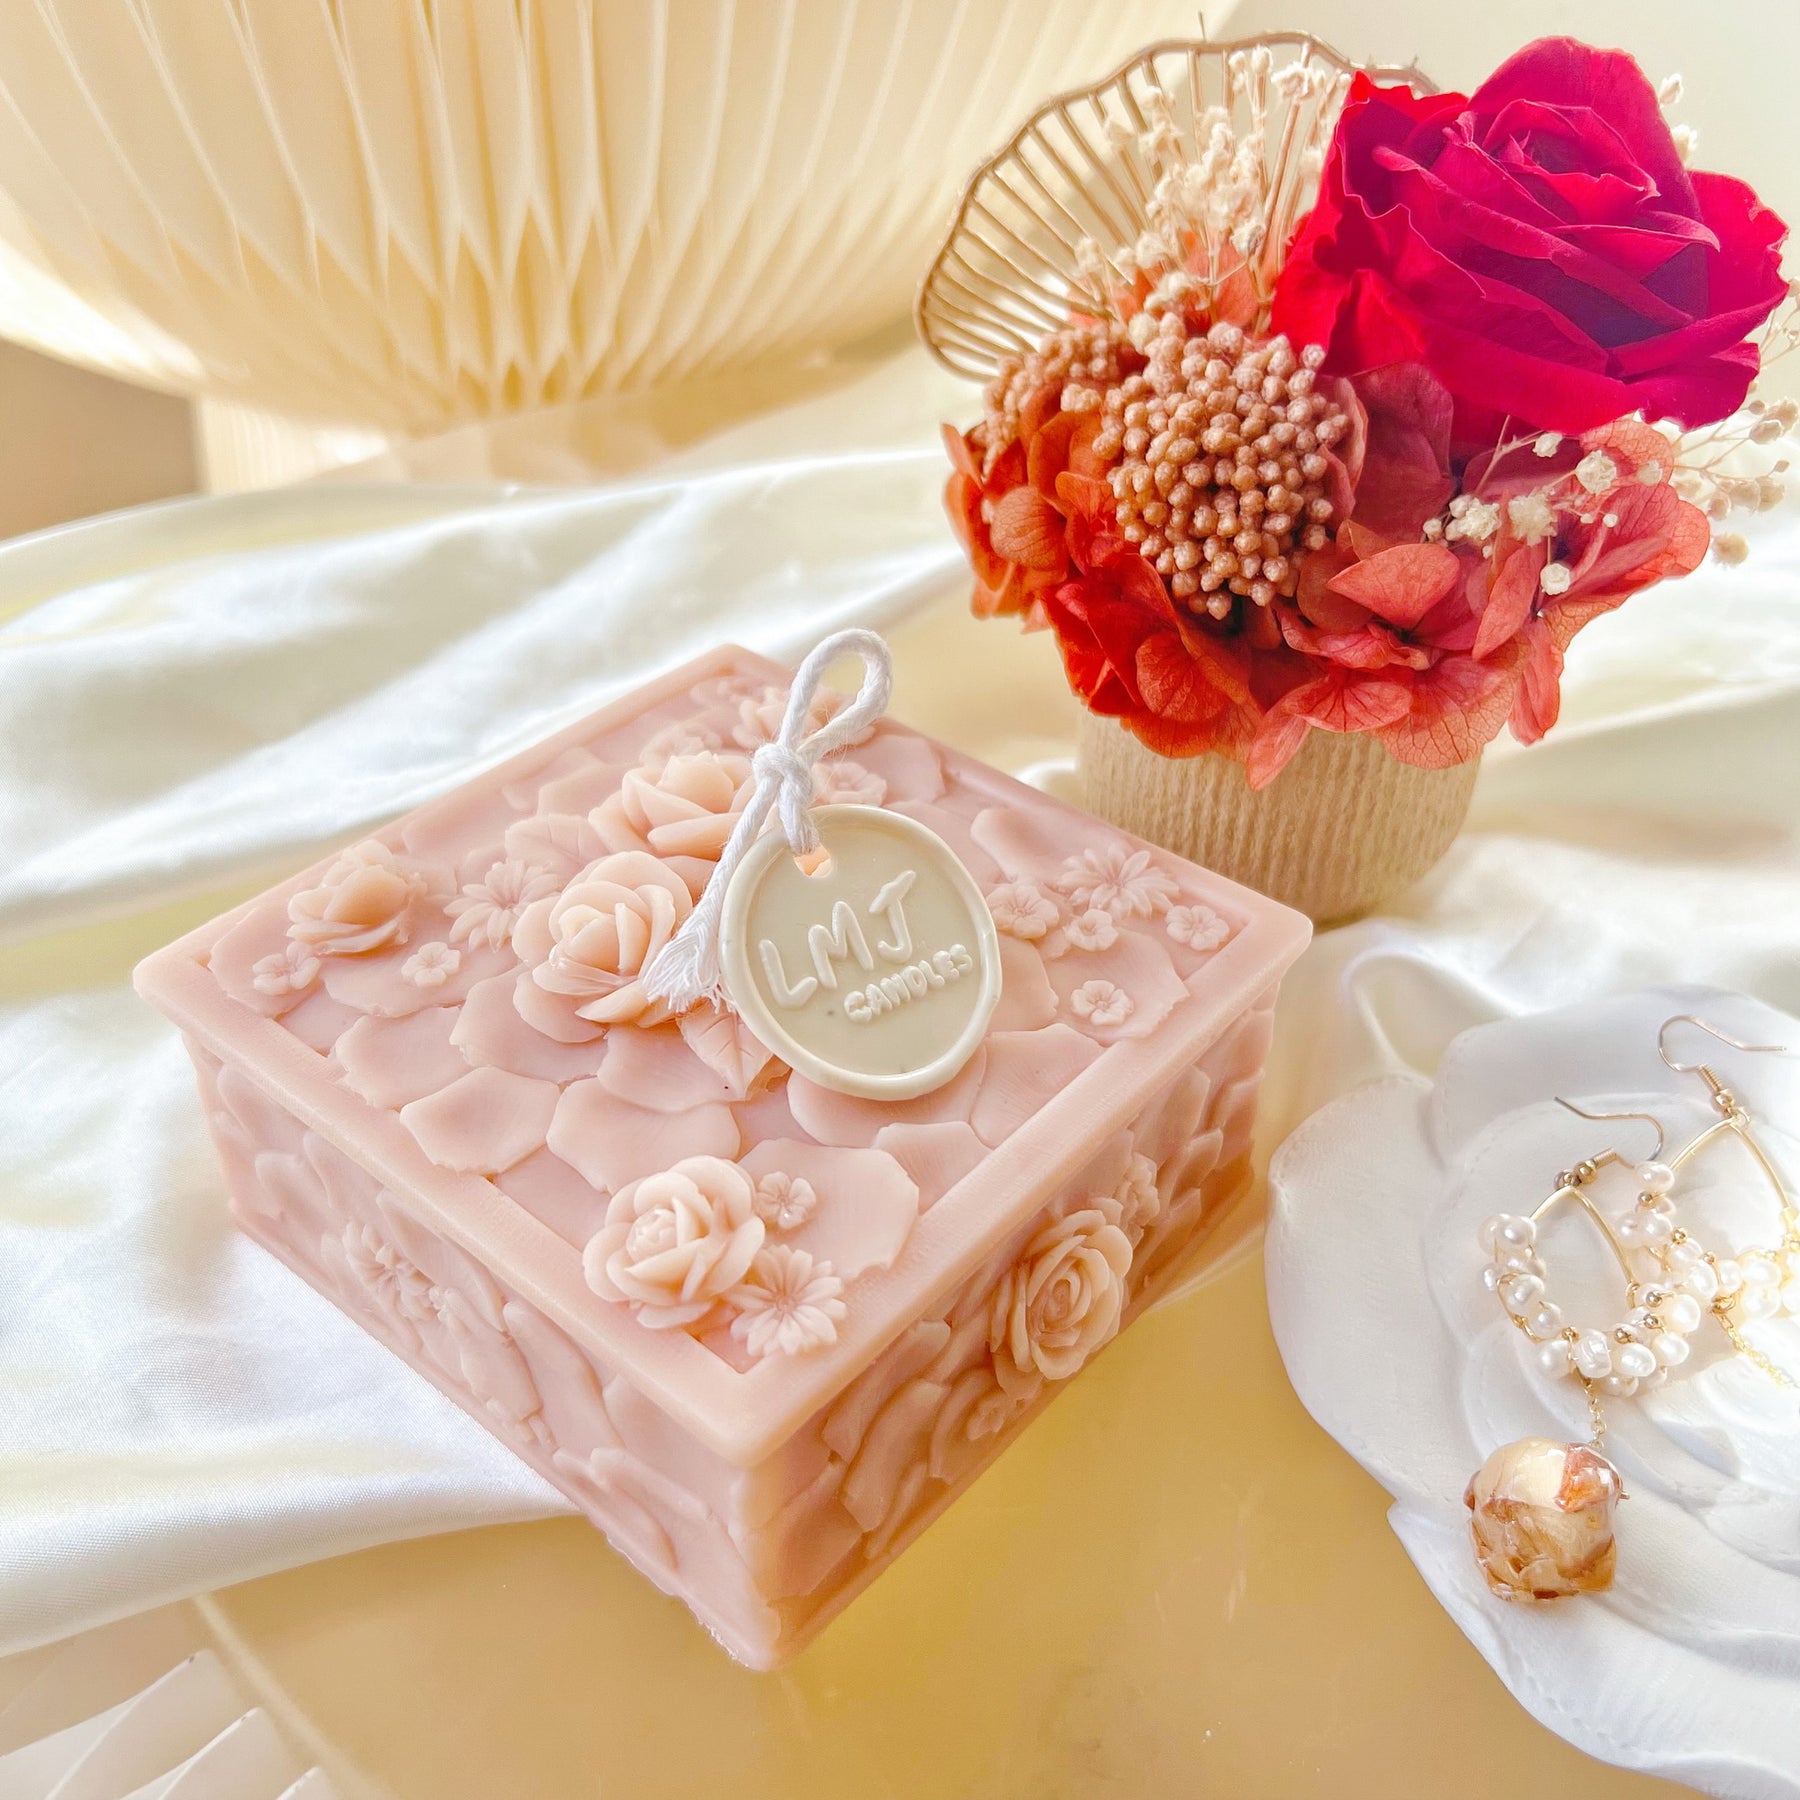 Rose Keepsake Box Scented Soy Candle - Anniversary Gift | LMJ Candles